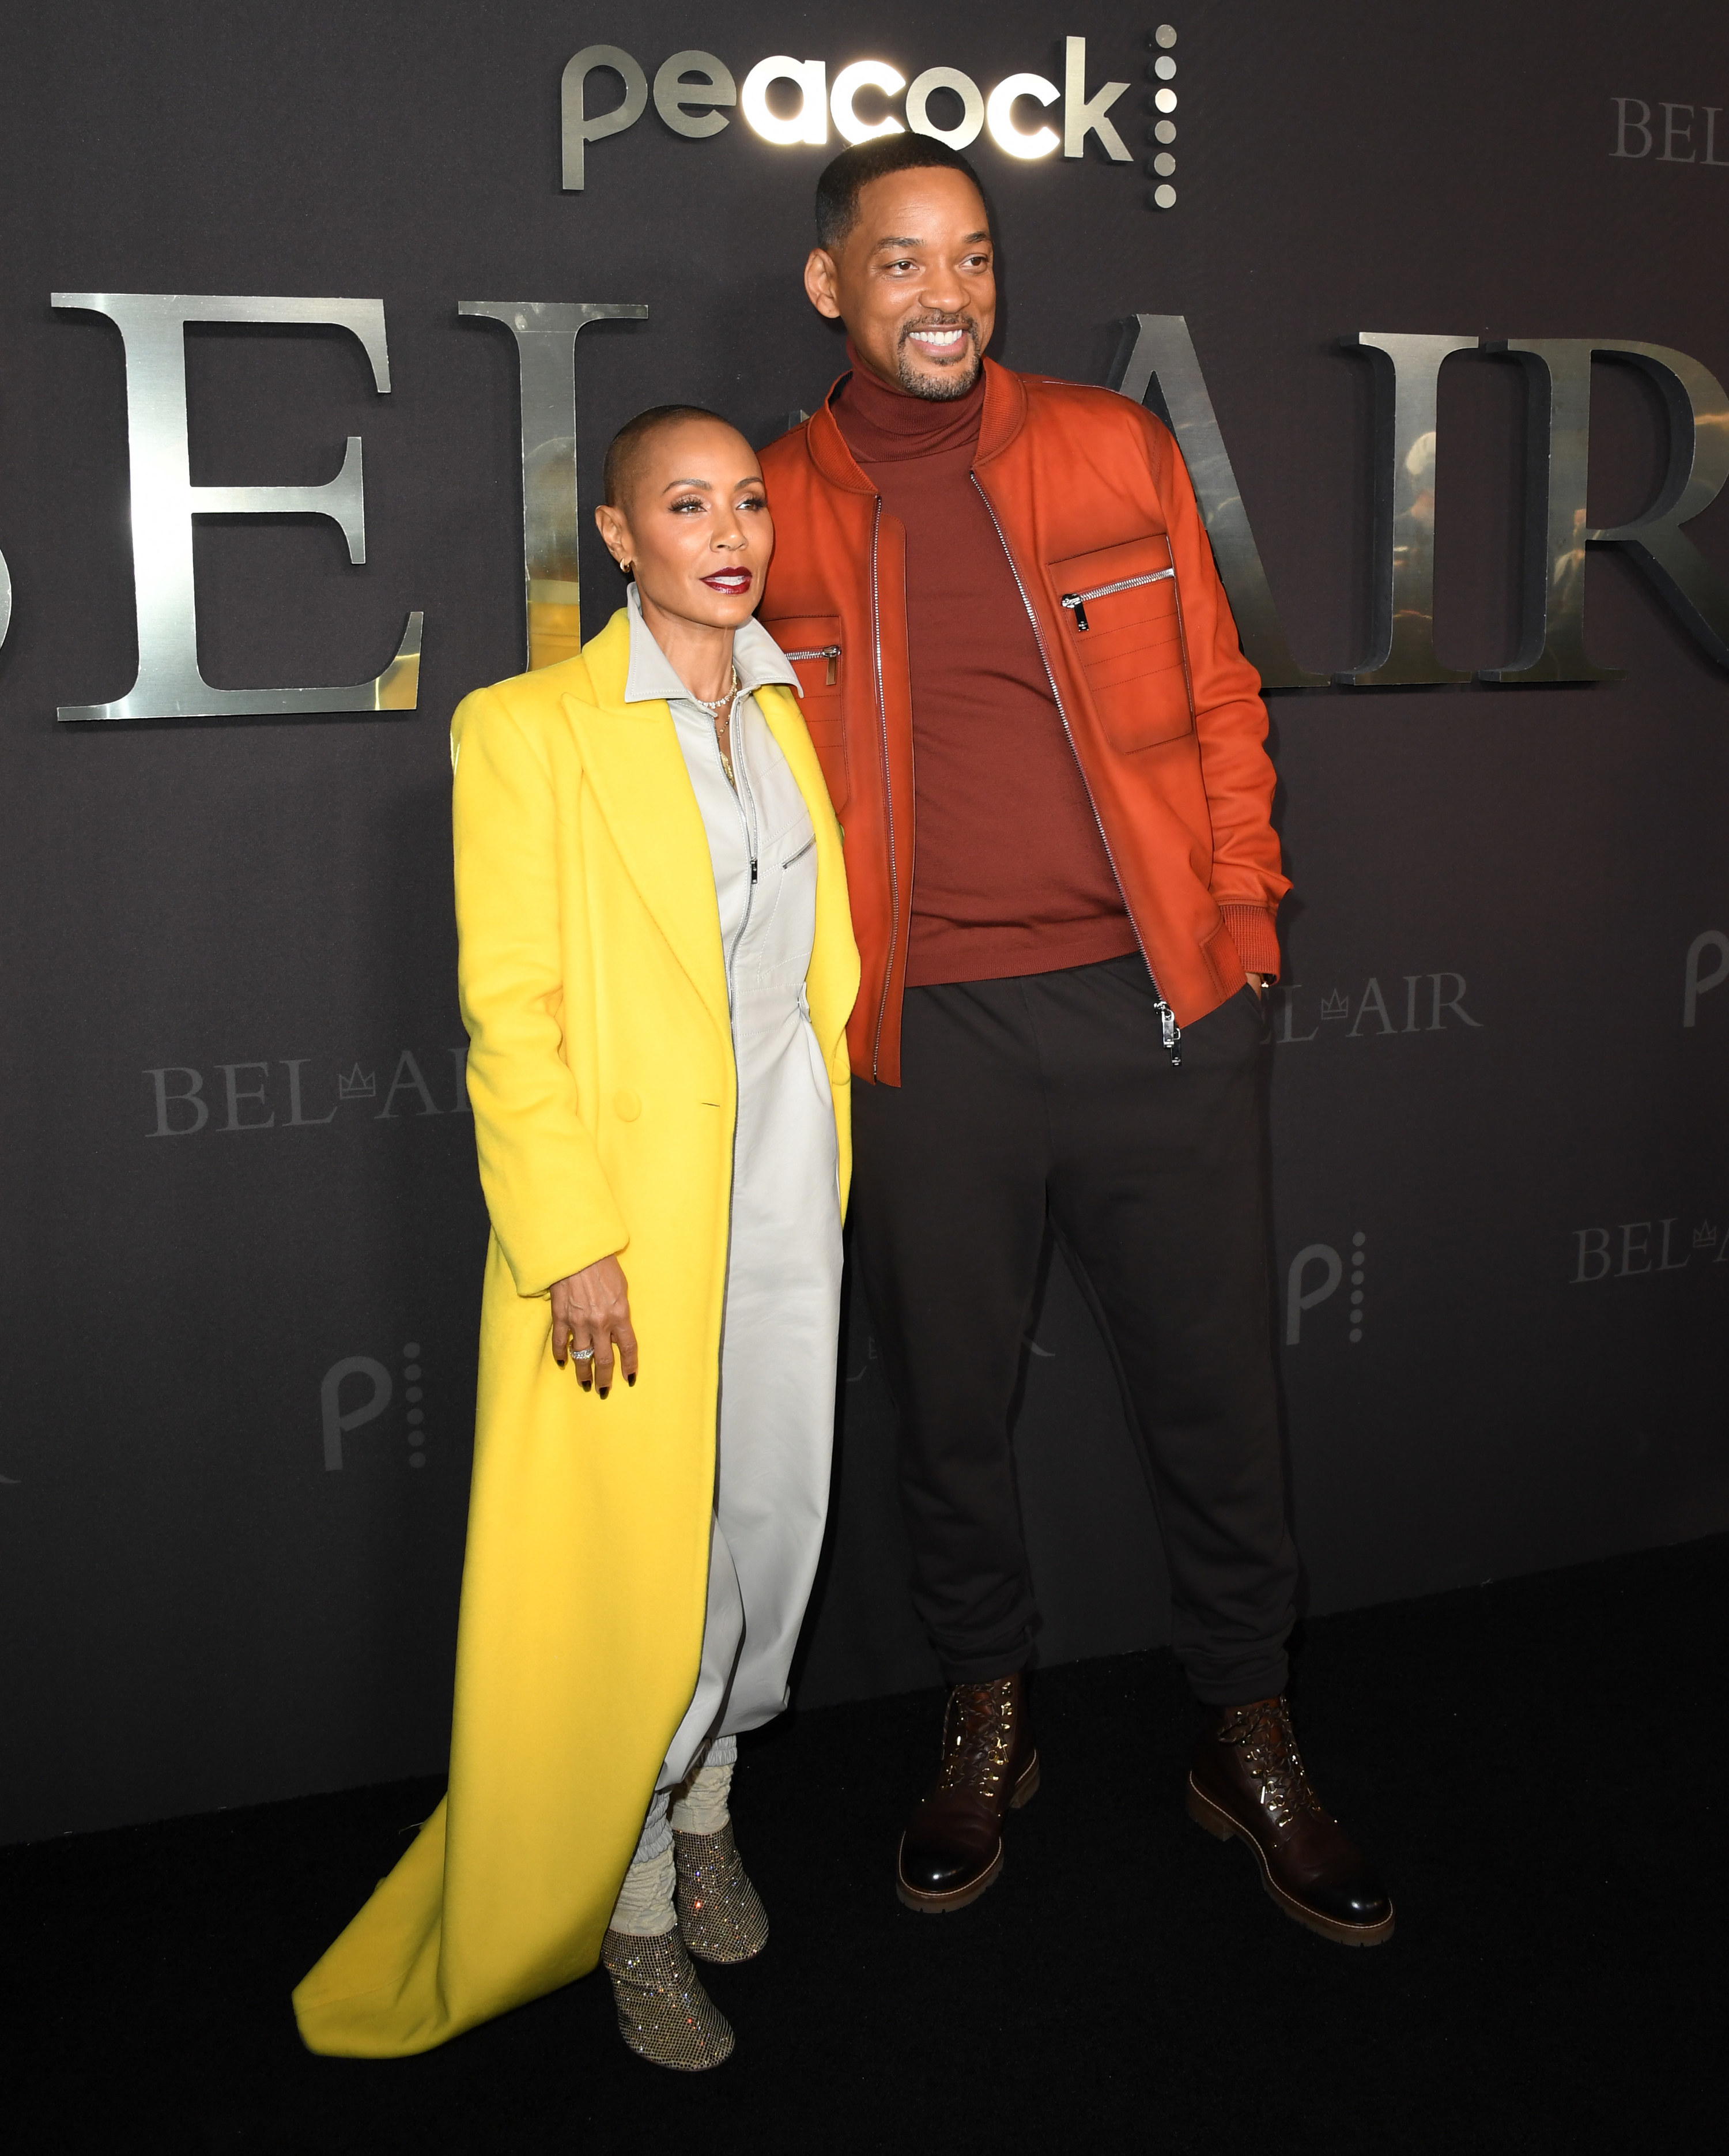 Will Smith and Jada Pinkett Smith pose at the Peacock premiere.